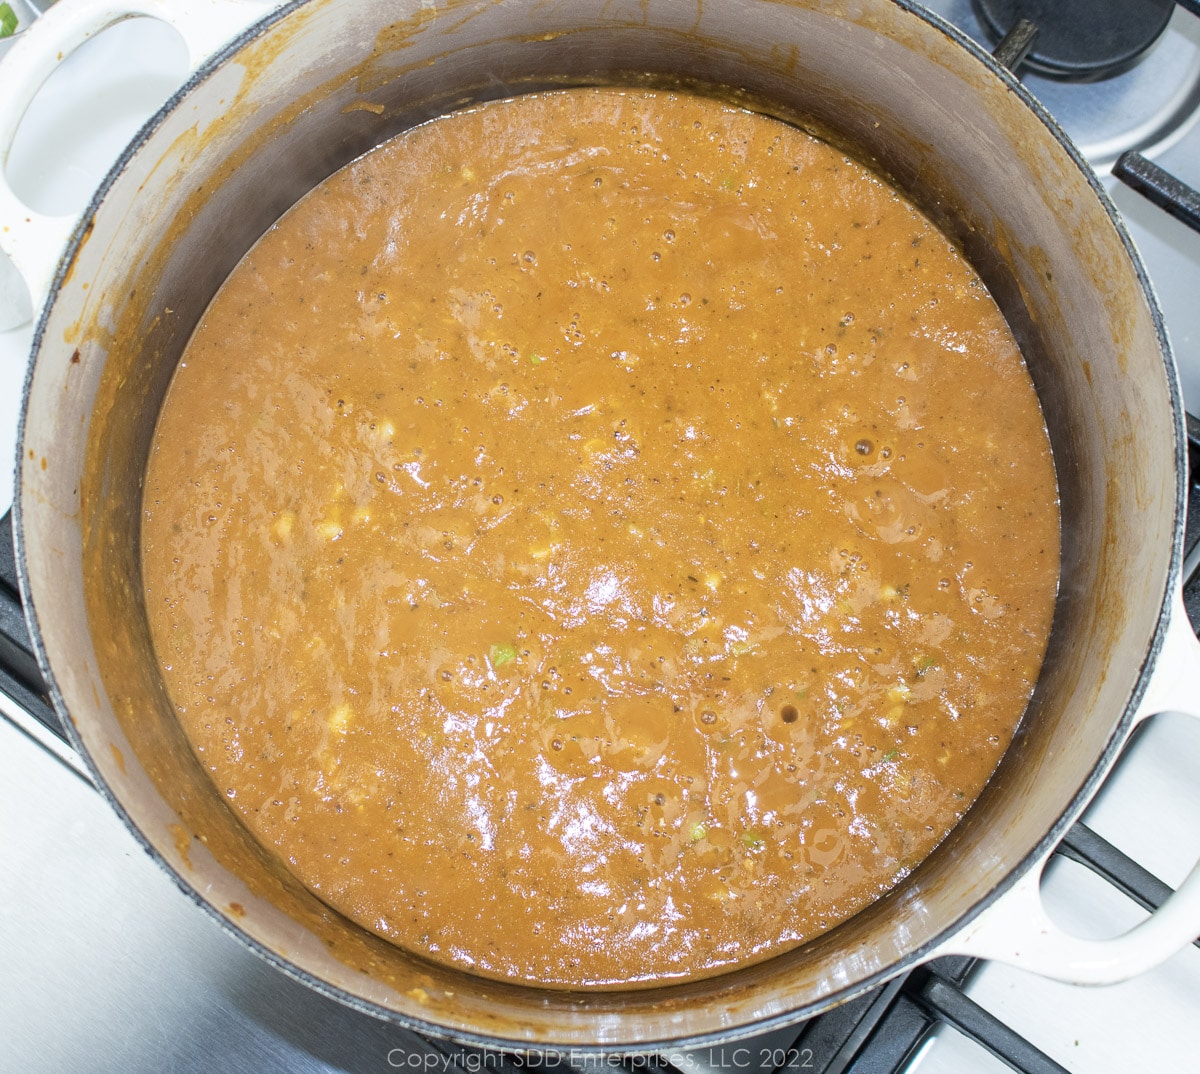 simmering pureed soup in a Dutch oven